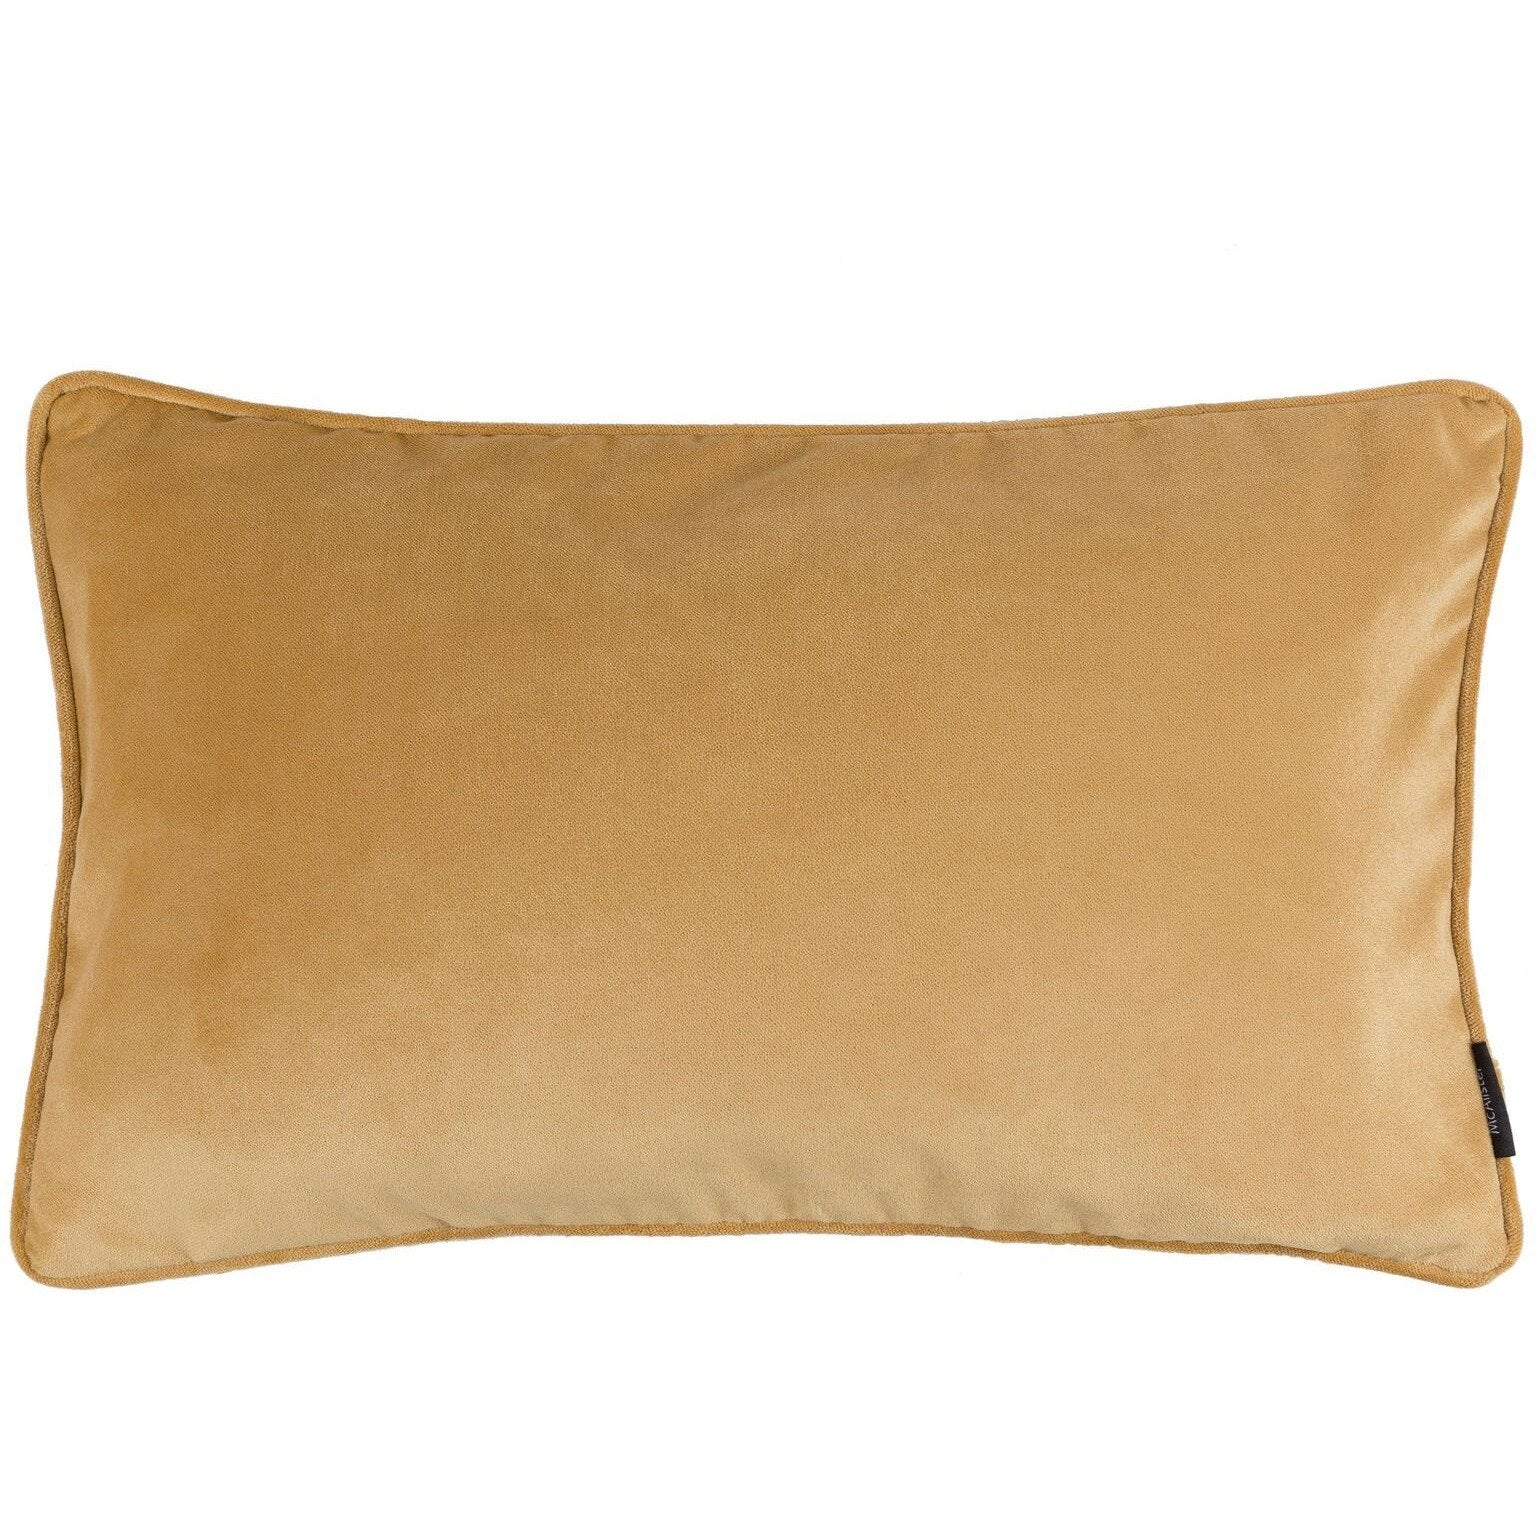 McAlister Textiles Matt Ochre Yellow Velvet Cushion Cushions and Covers Cover Only 50cm x 30cm 